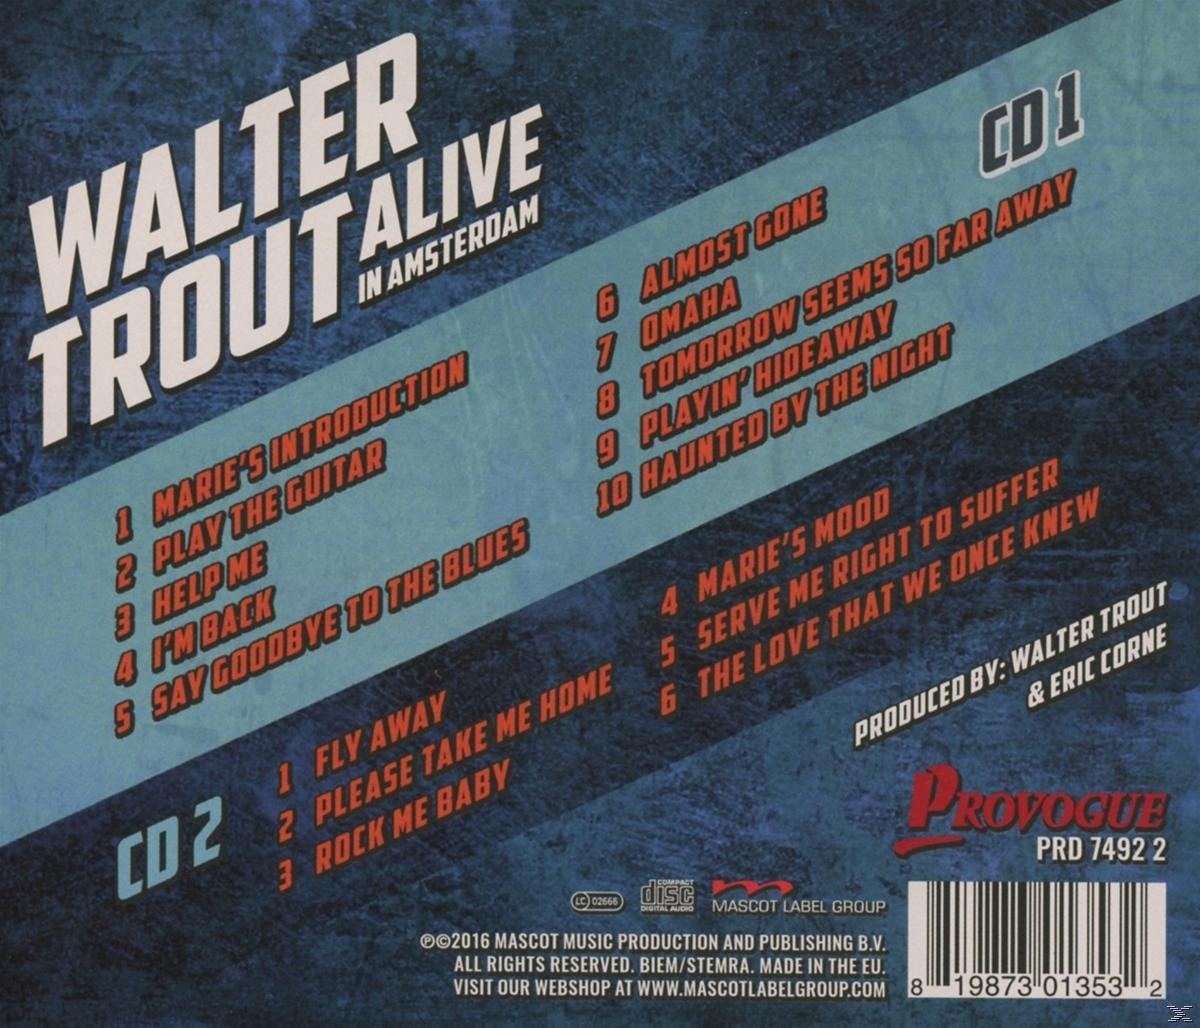 Walter Trout (CD) - - In ALIVE Amsterdam